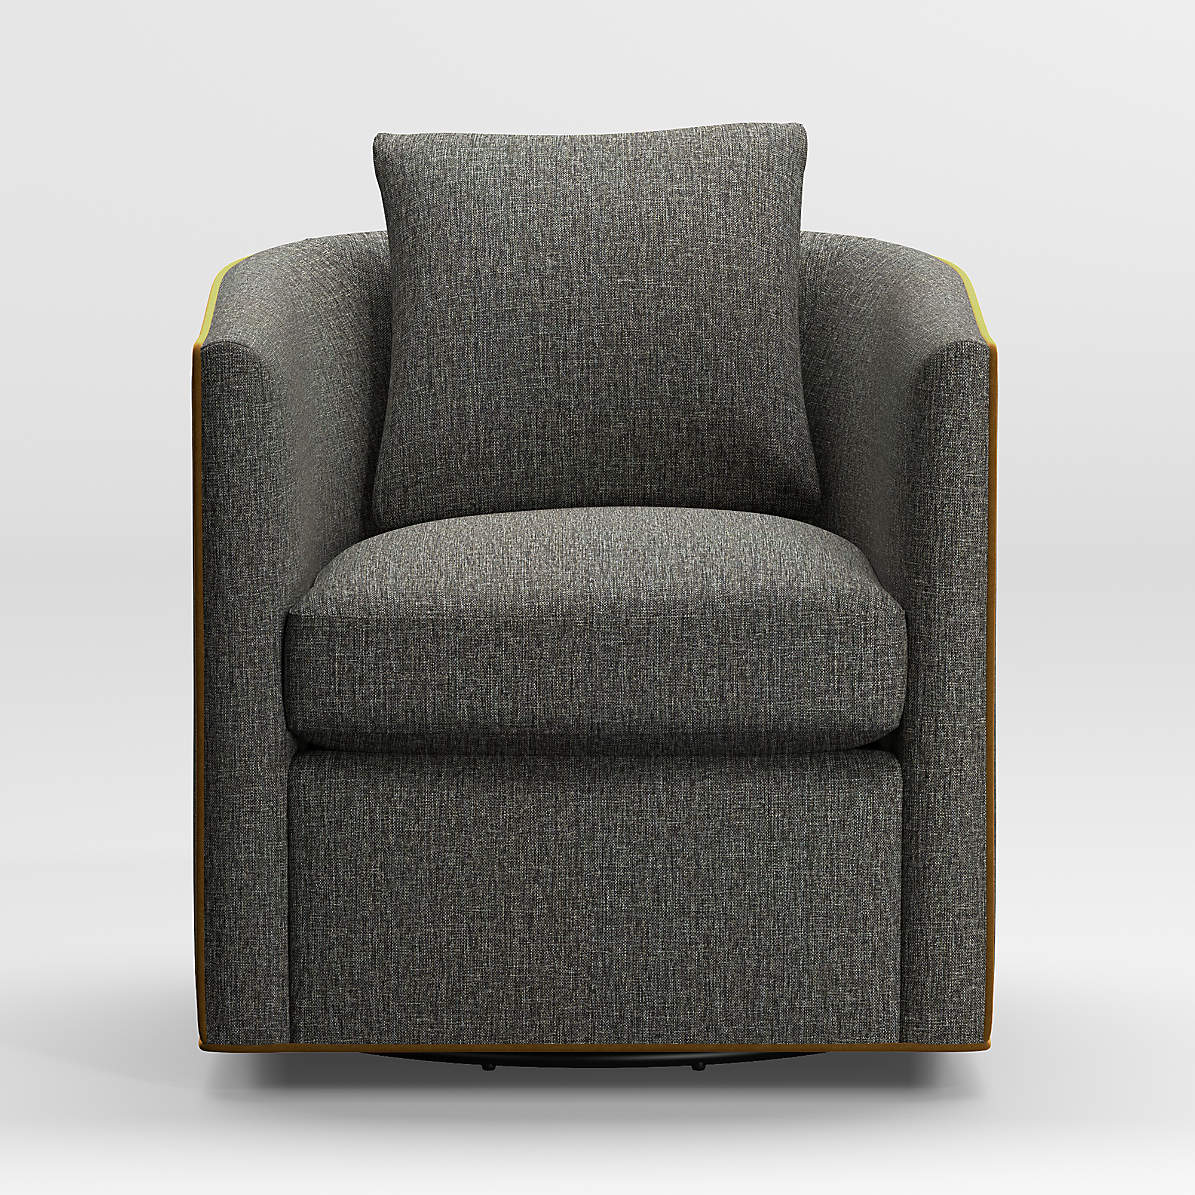 Drew Small Swivel Chair Reviews, Small Swivel Chairs For Living Room